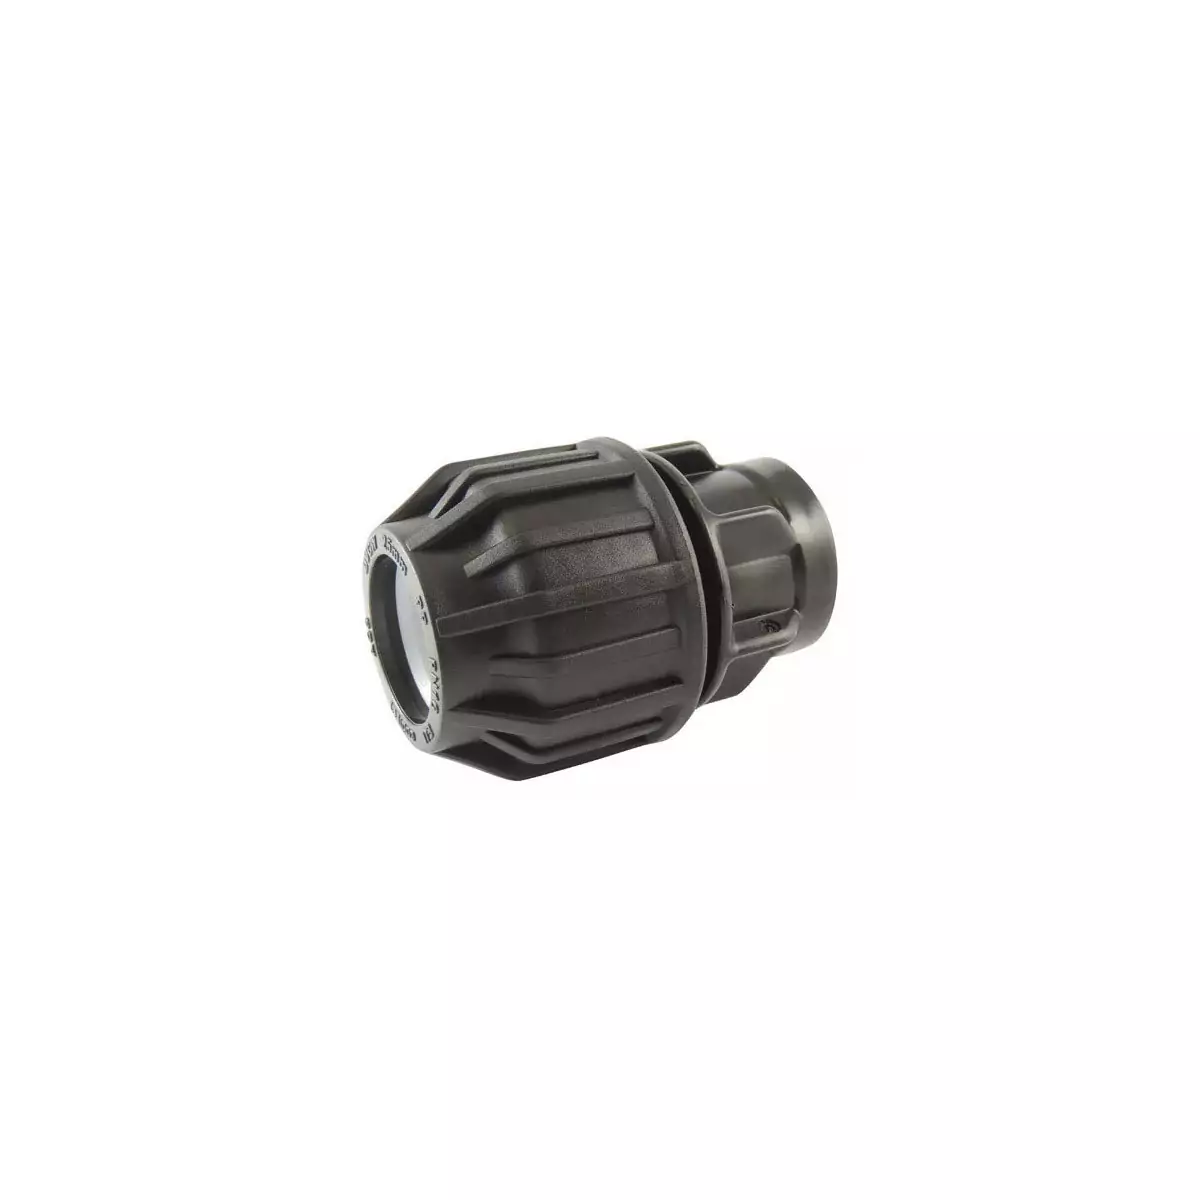 Compression fitting with BSP female thread